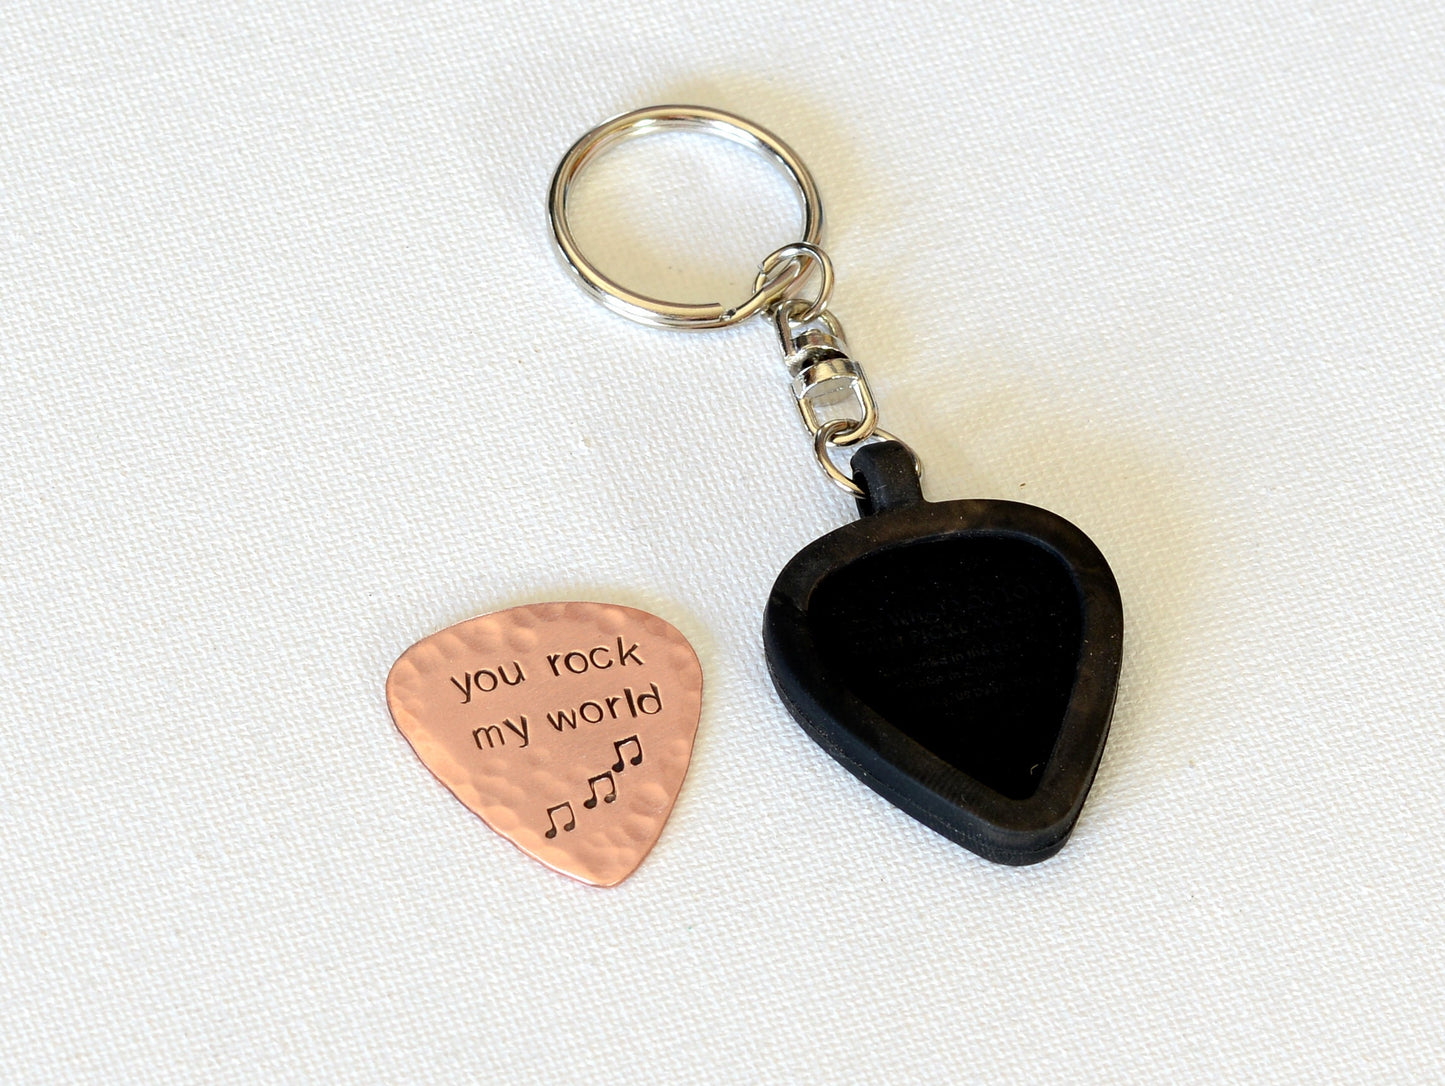 Copper guitar pick keychain with rubber holder